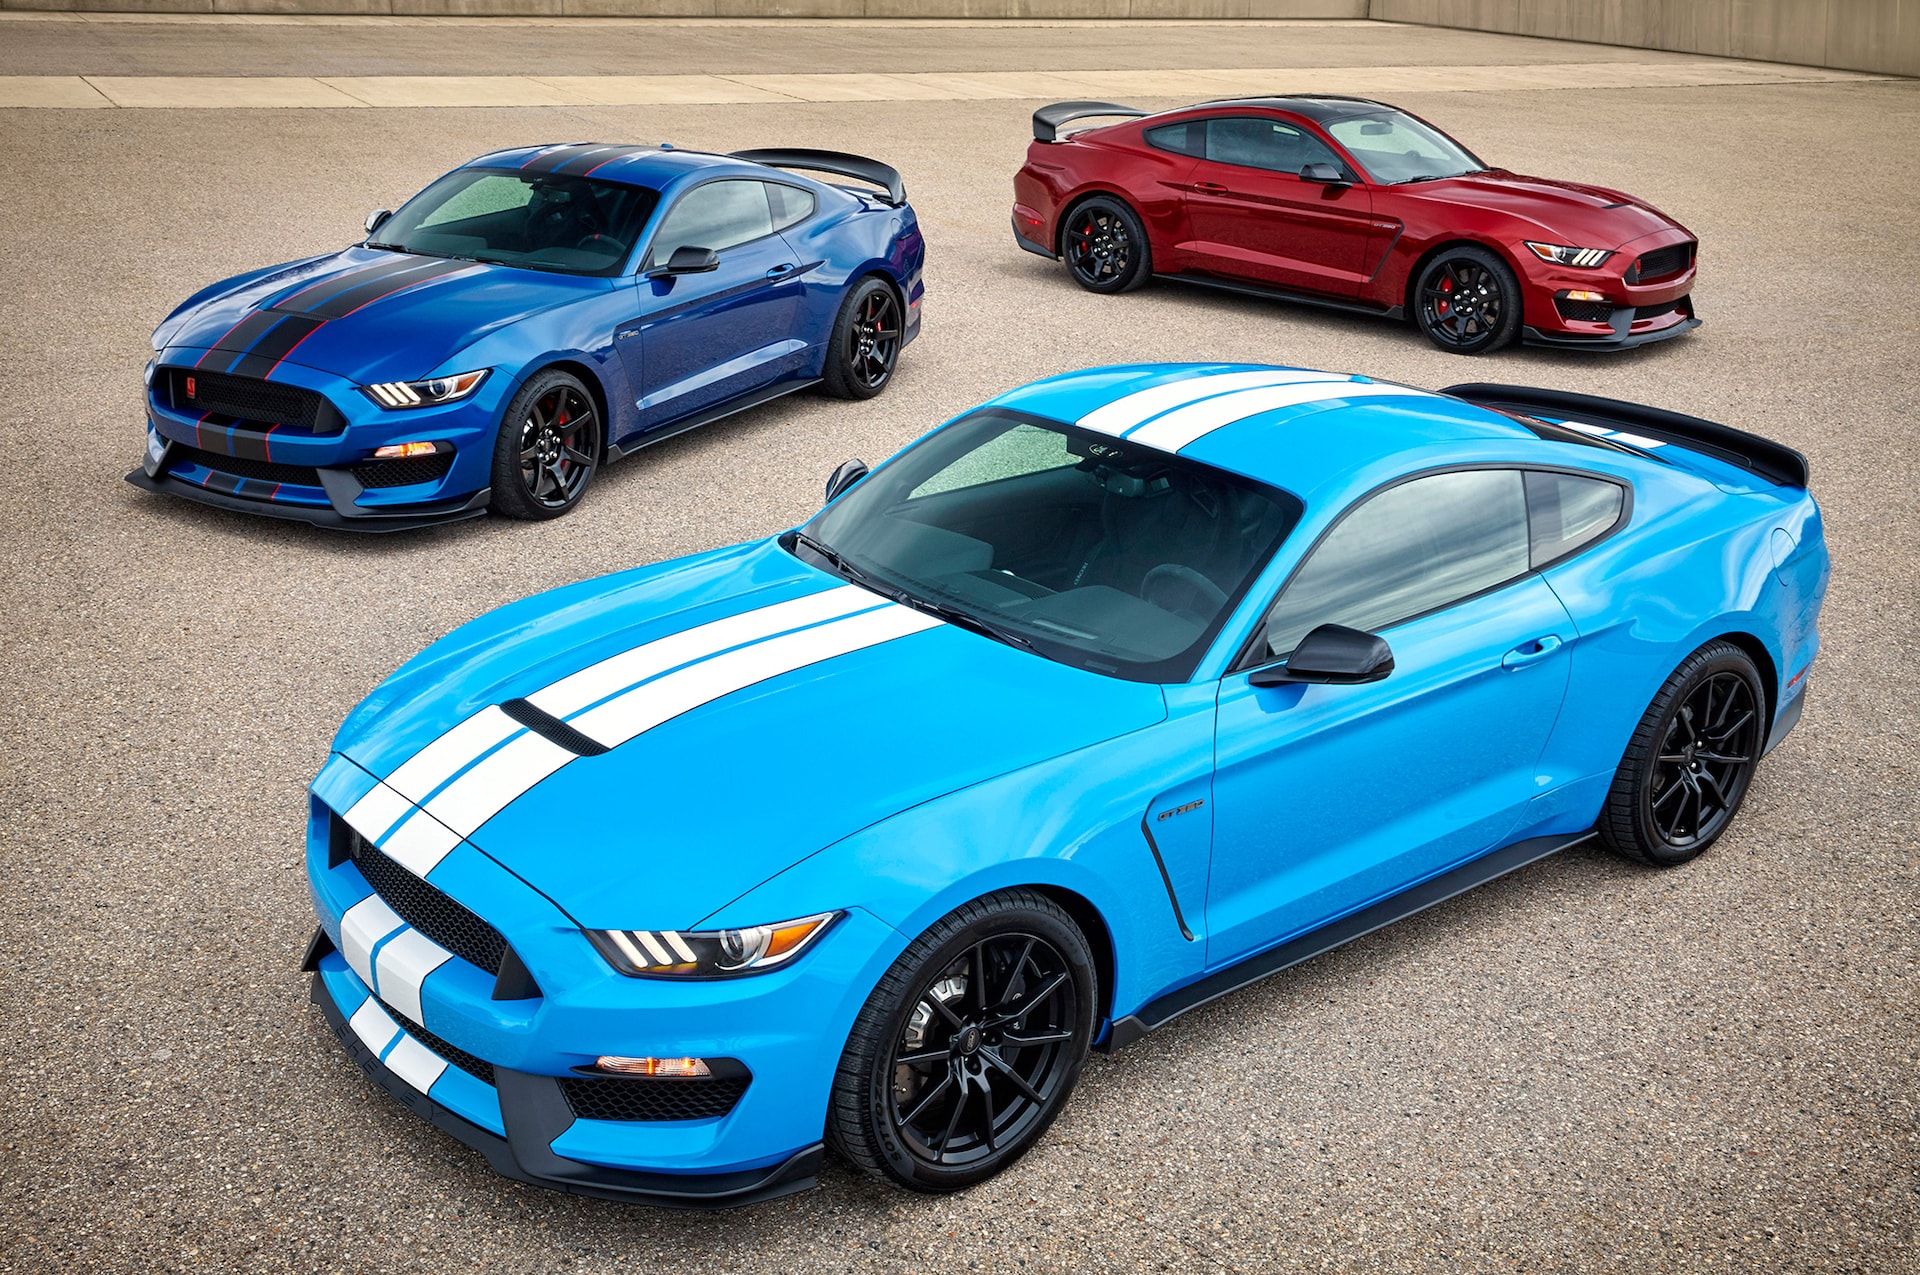 2017 Ford Shelby GT350 Gets Standard Track Package, New Color Choices